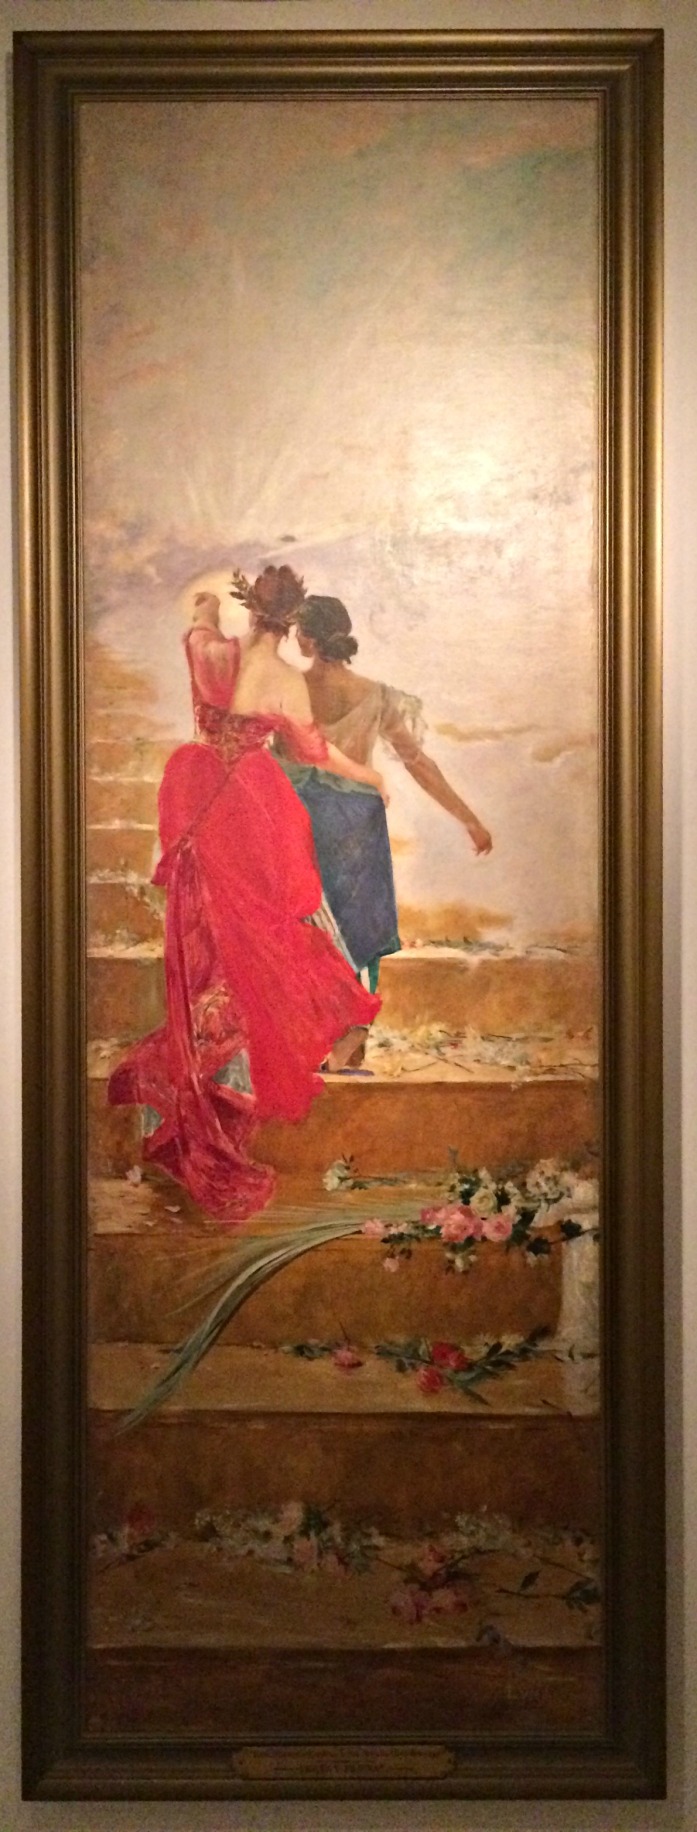 "España y Filipinos" on Oil on Canvas by Juan Luna on 1886. A Lopez Museum and Library collection.